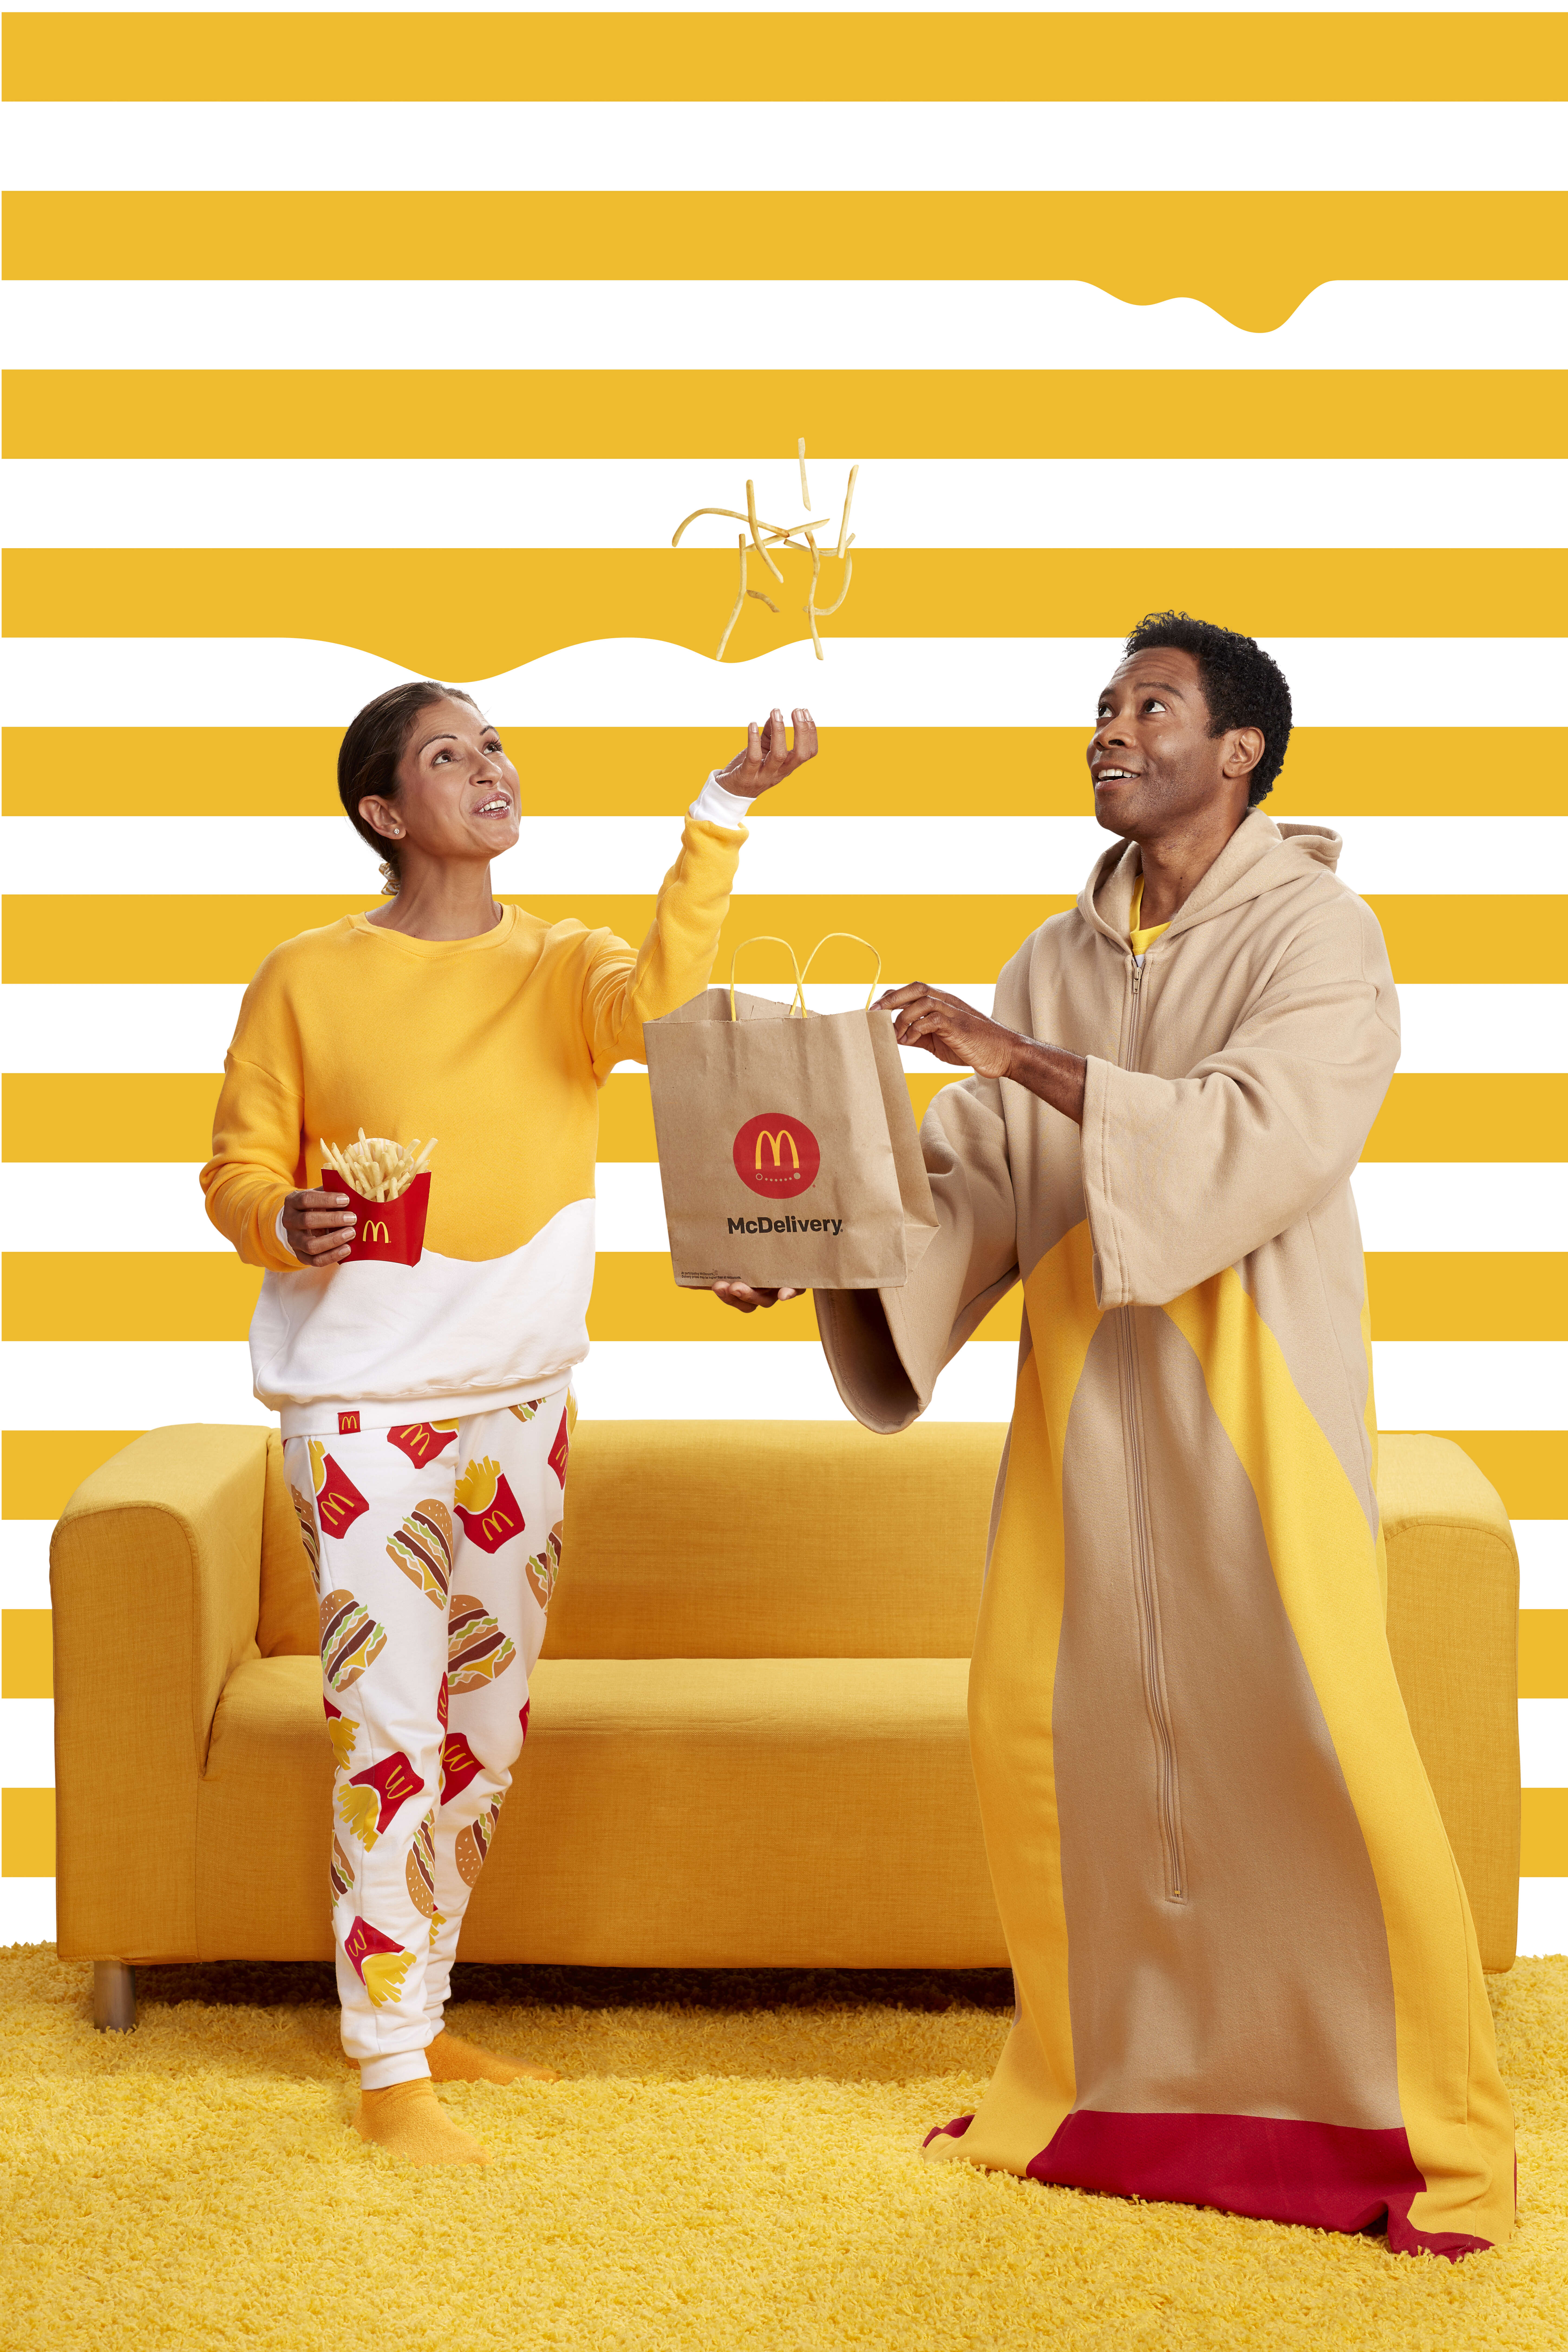 McDelivery Day 2019